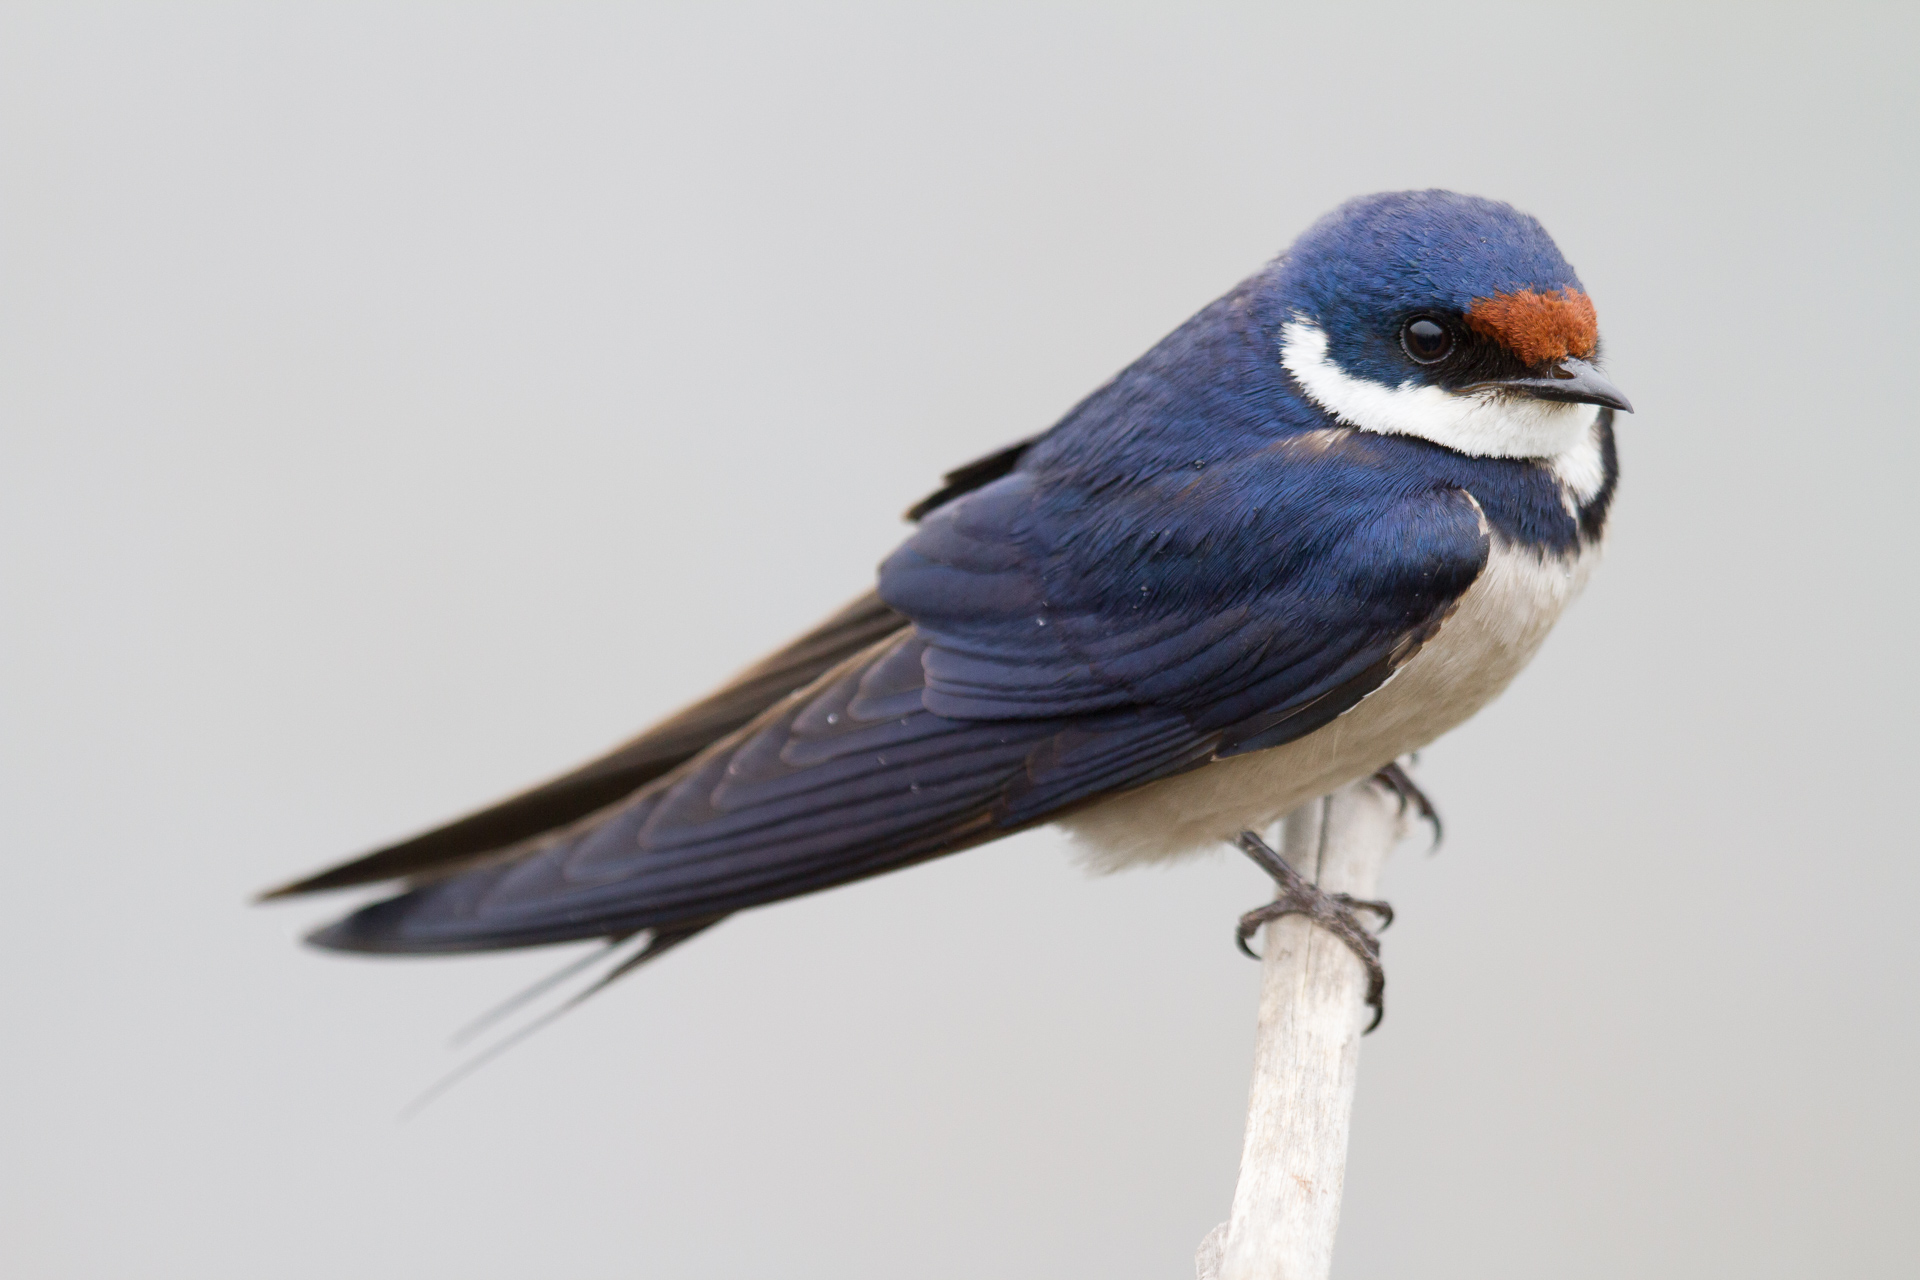 White-throated Swallow, Marivale, South Africa